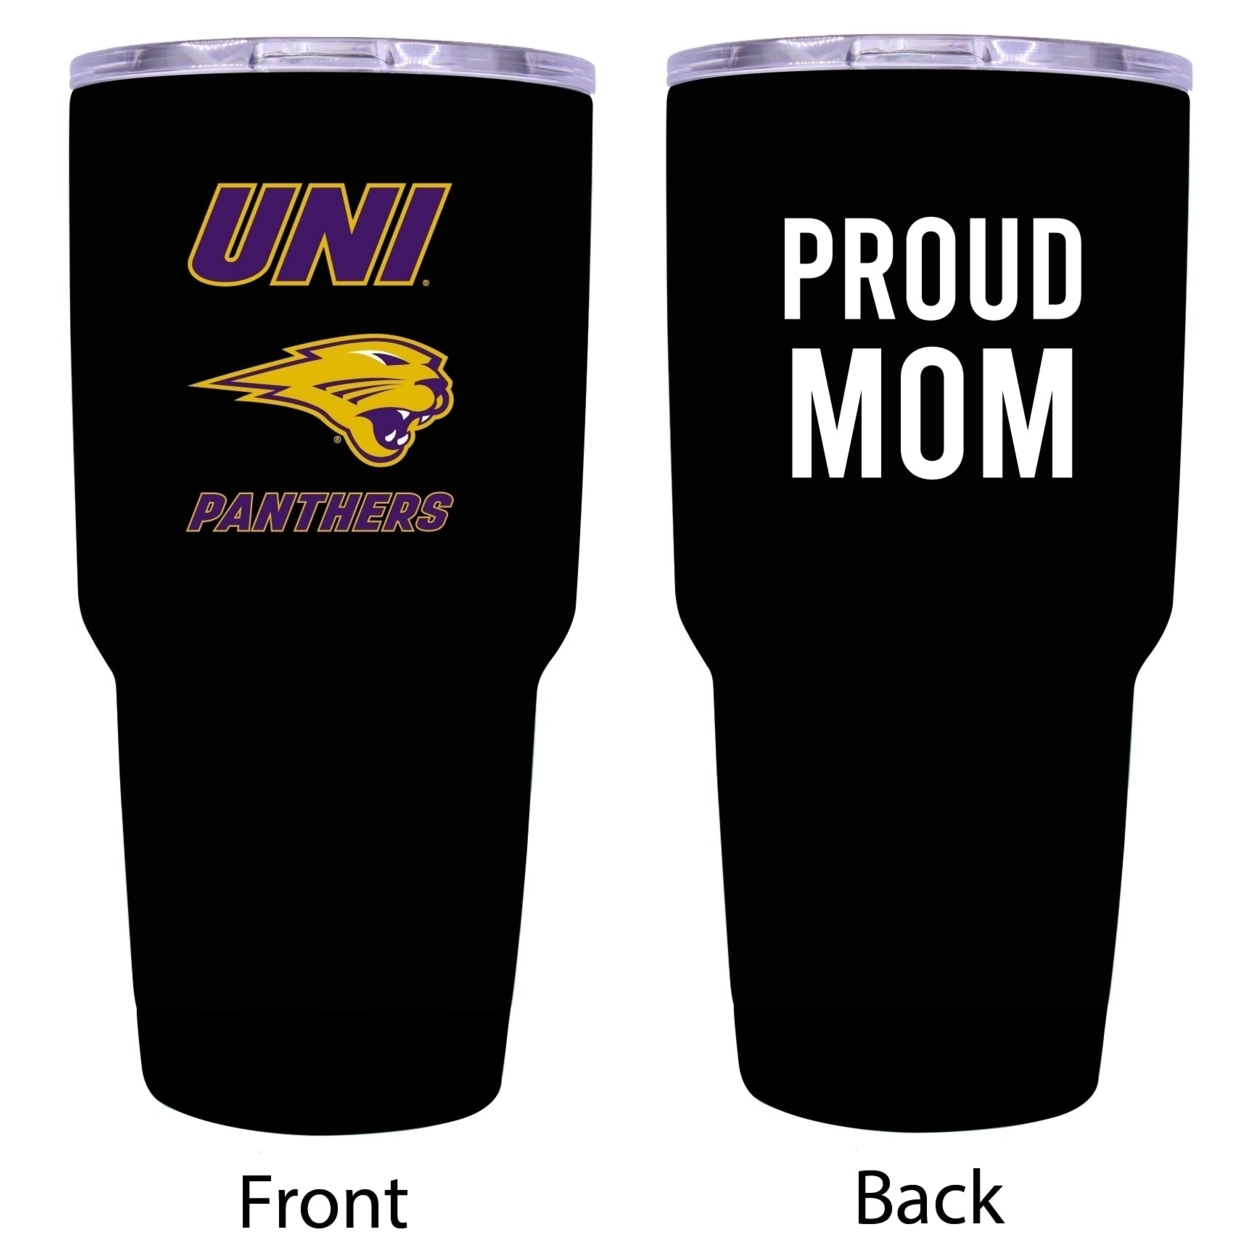 R And R Imports Northern Iowa Panthers Proud Mom 24 Oz Insulated Stainless Steel Tumblers Black.